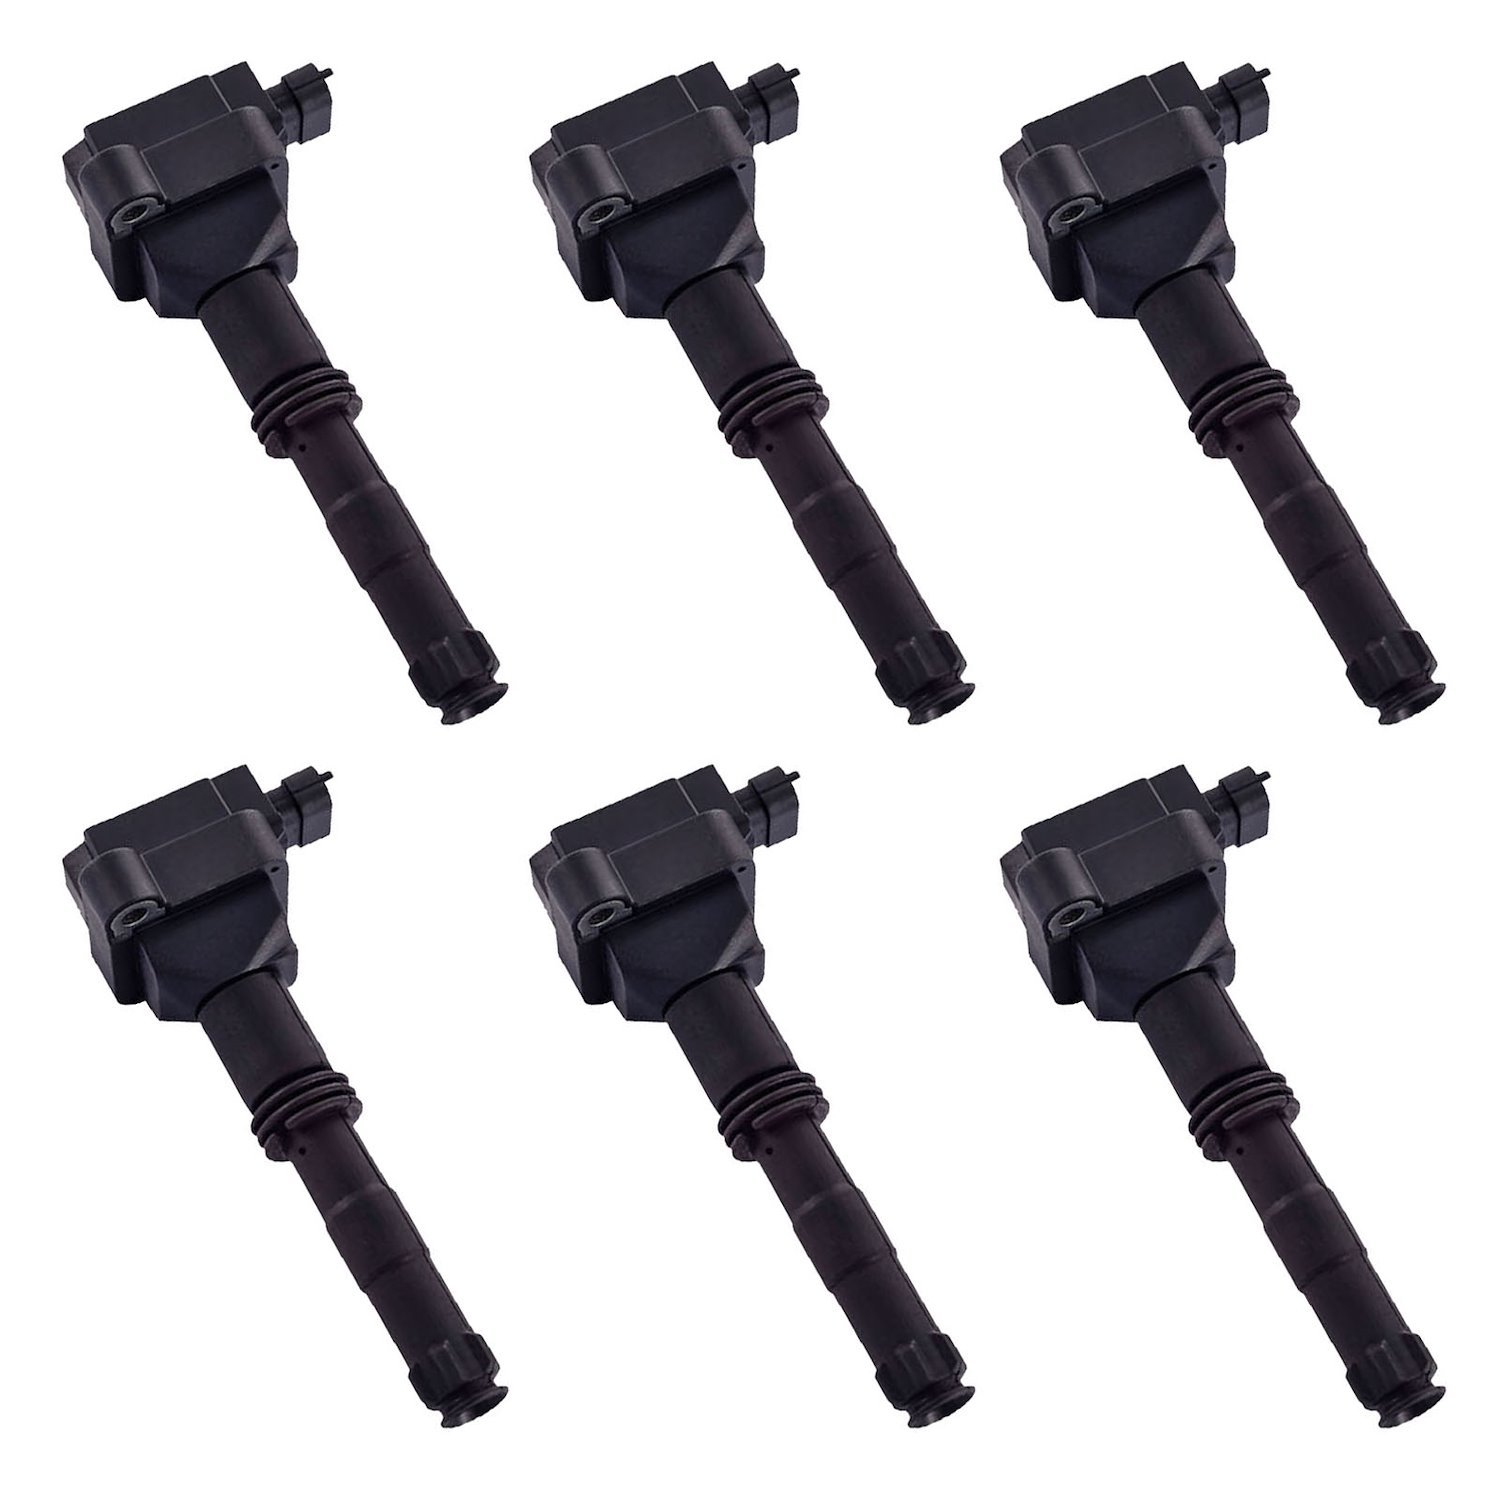 OE Replacement Ignition Coils for 1997-2012 Porsche 911 Boxster Cayman 2.5L-3.6L